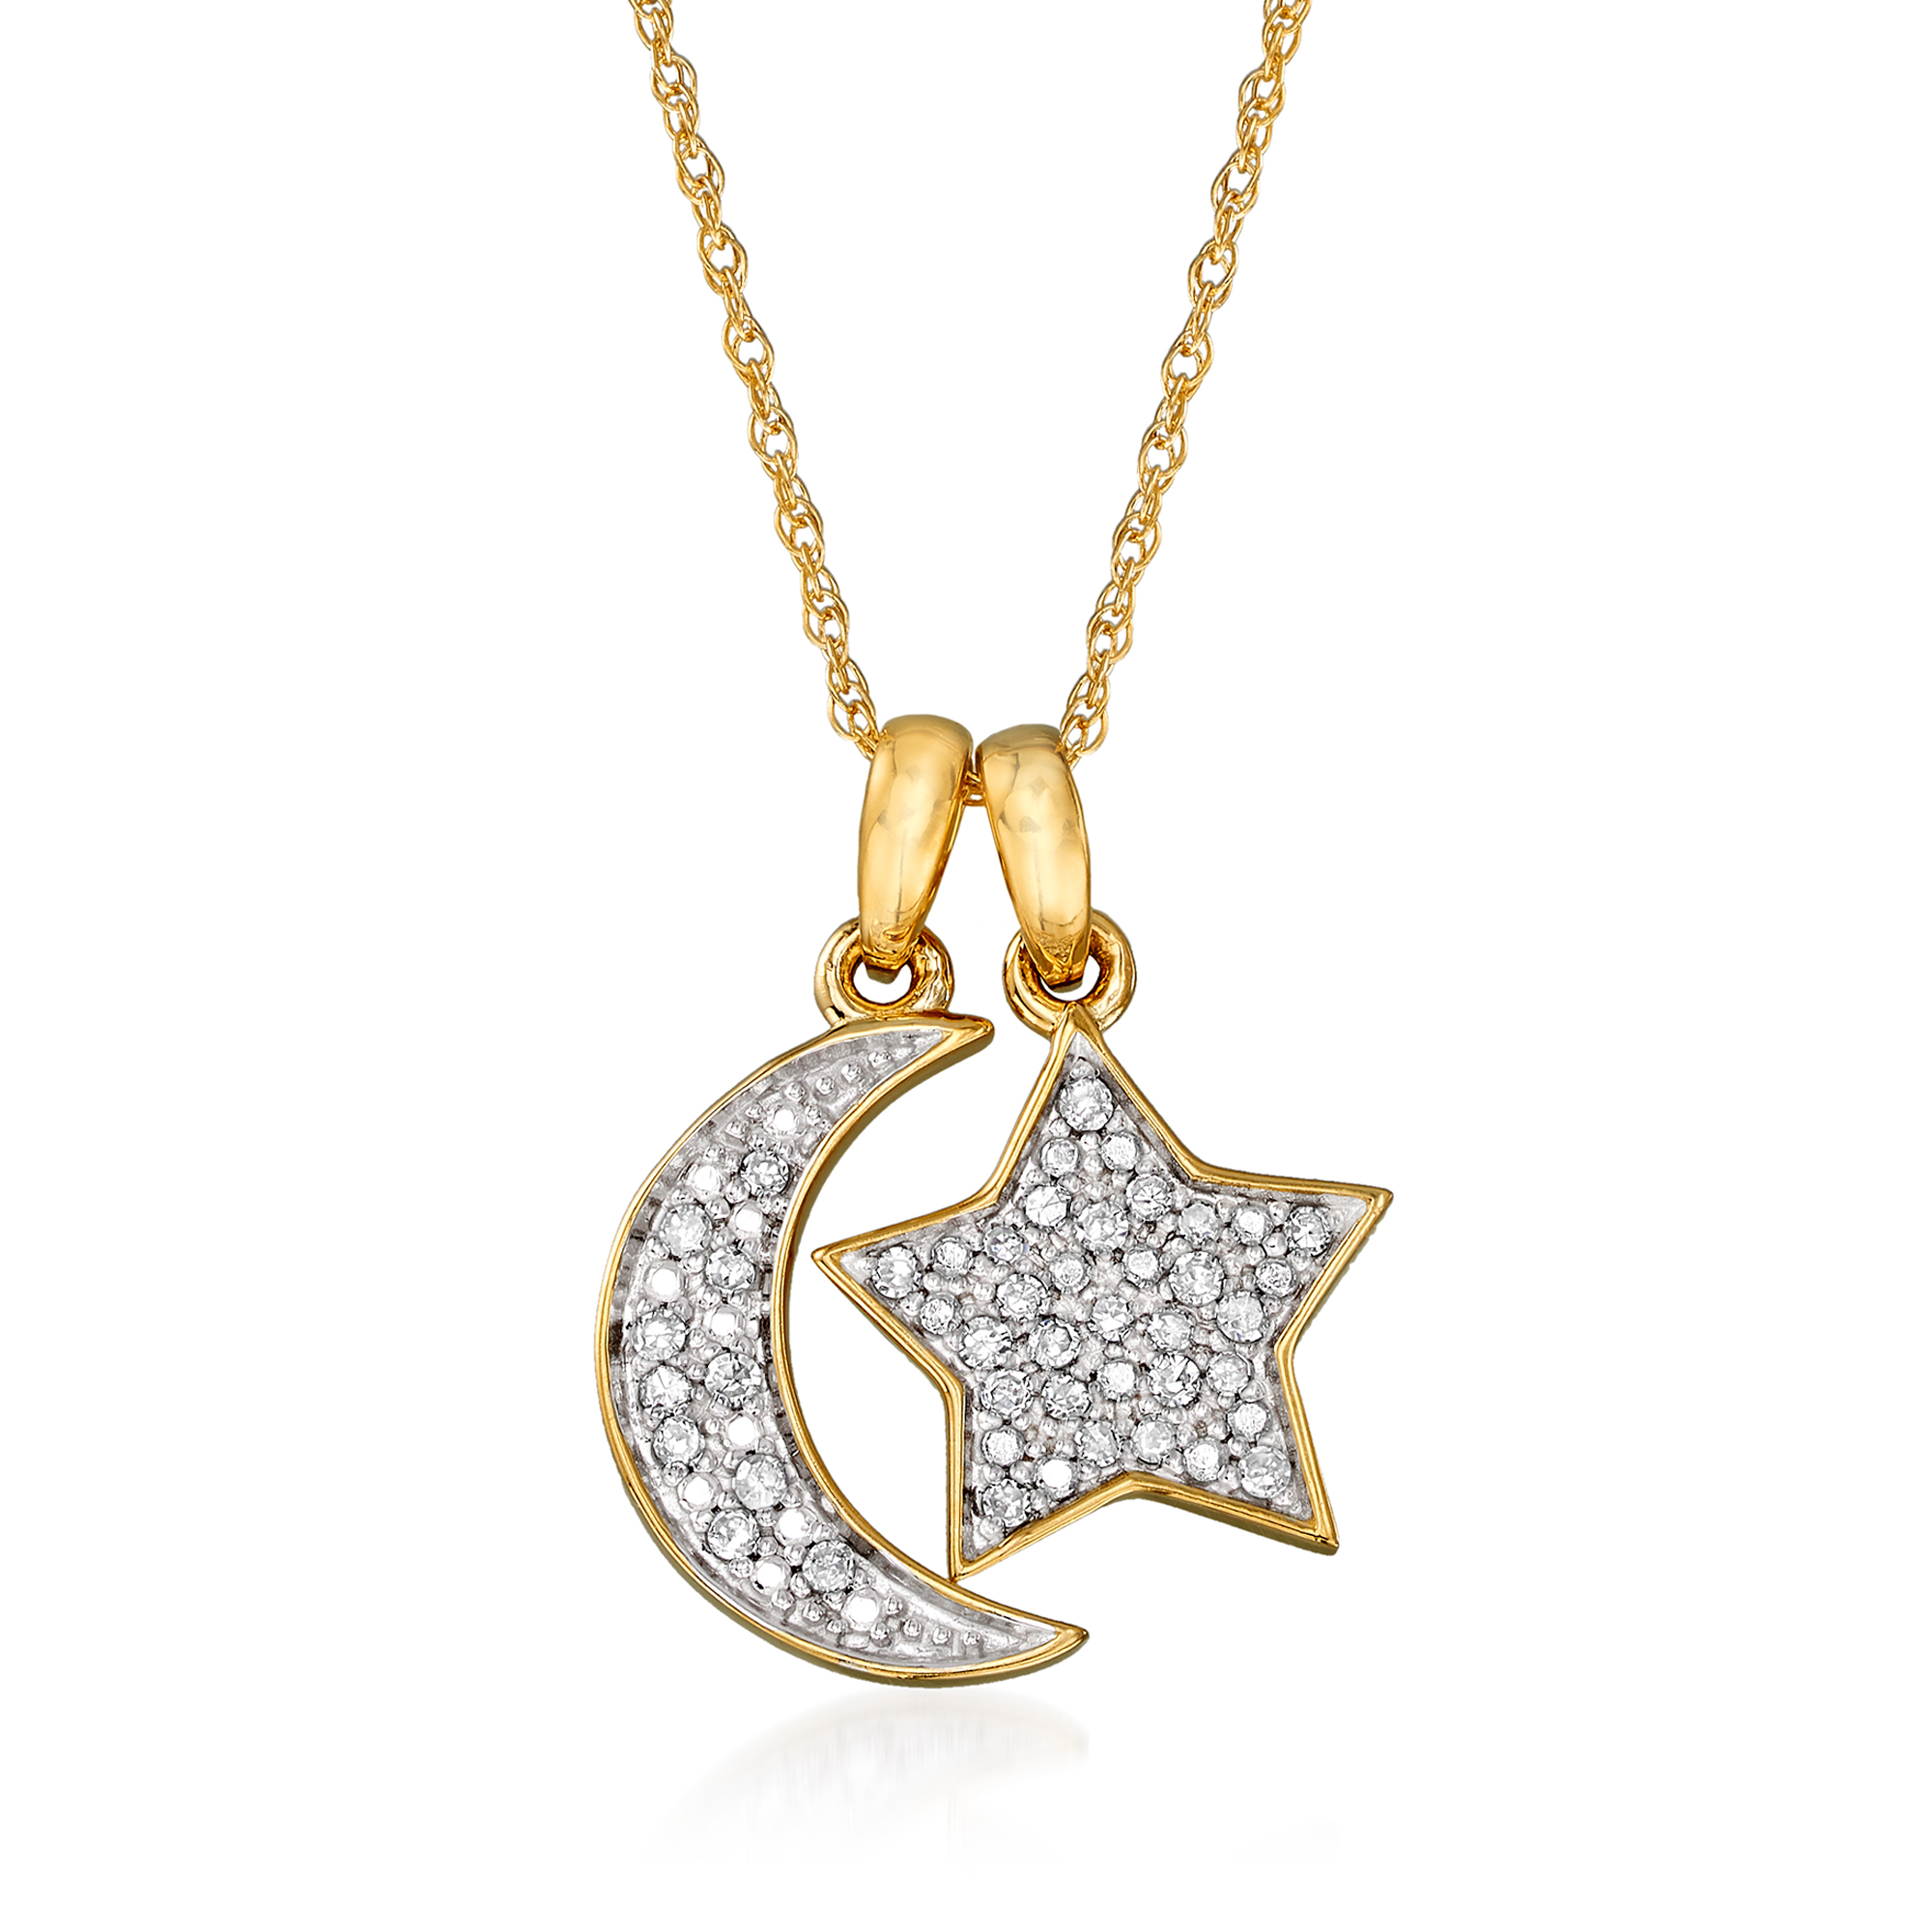 10 ct. t.w. Pave Diamond Star and Moon Charm Necklace in 14kt 